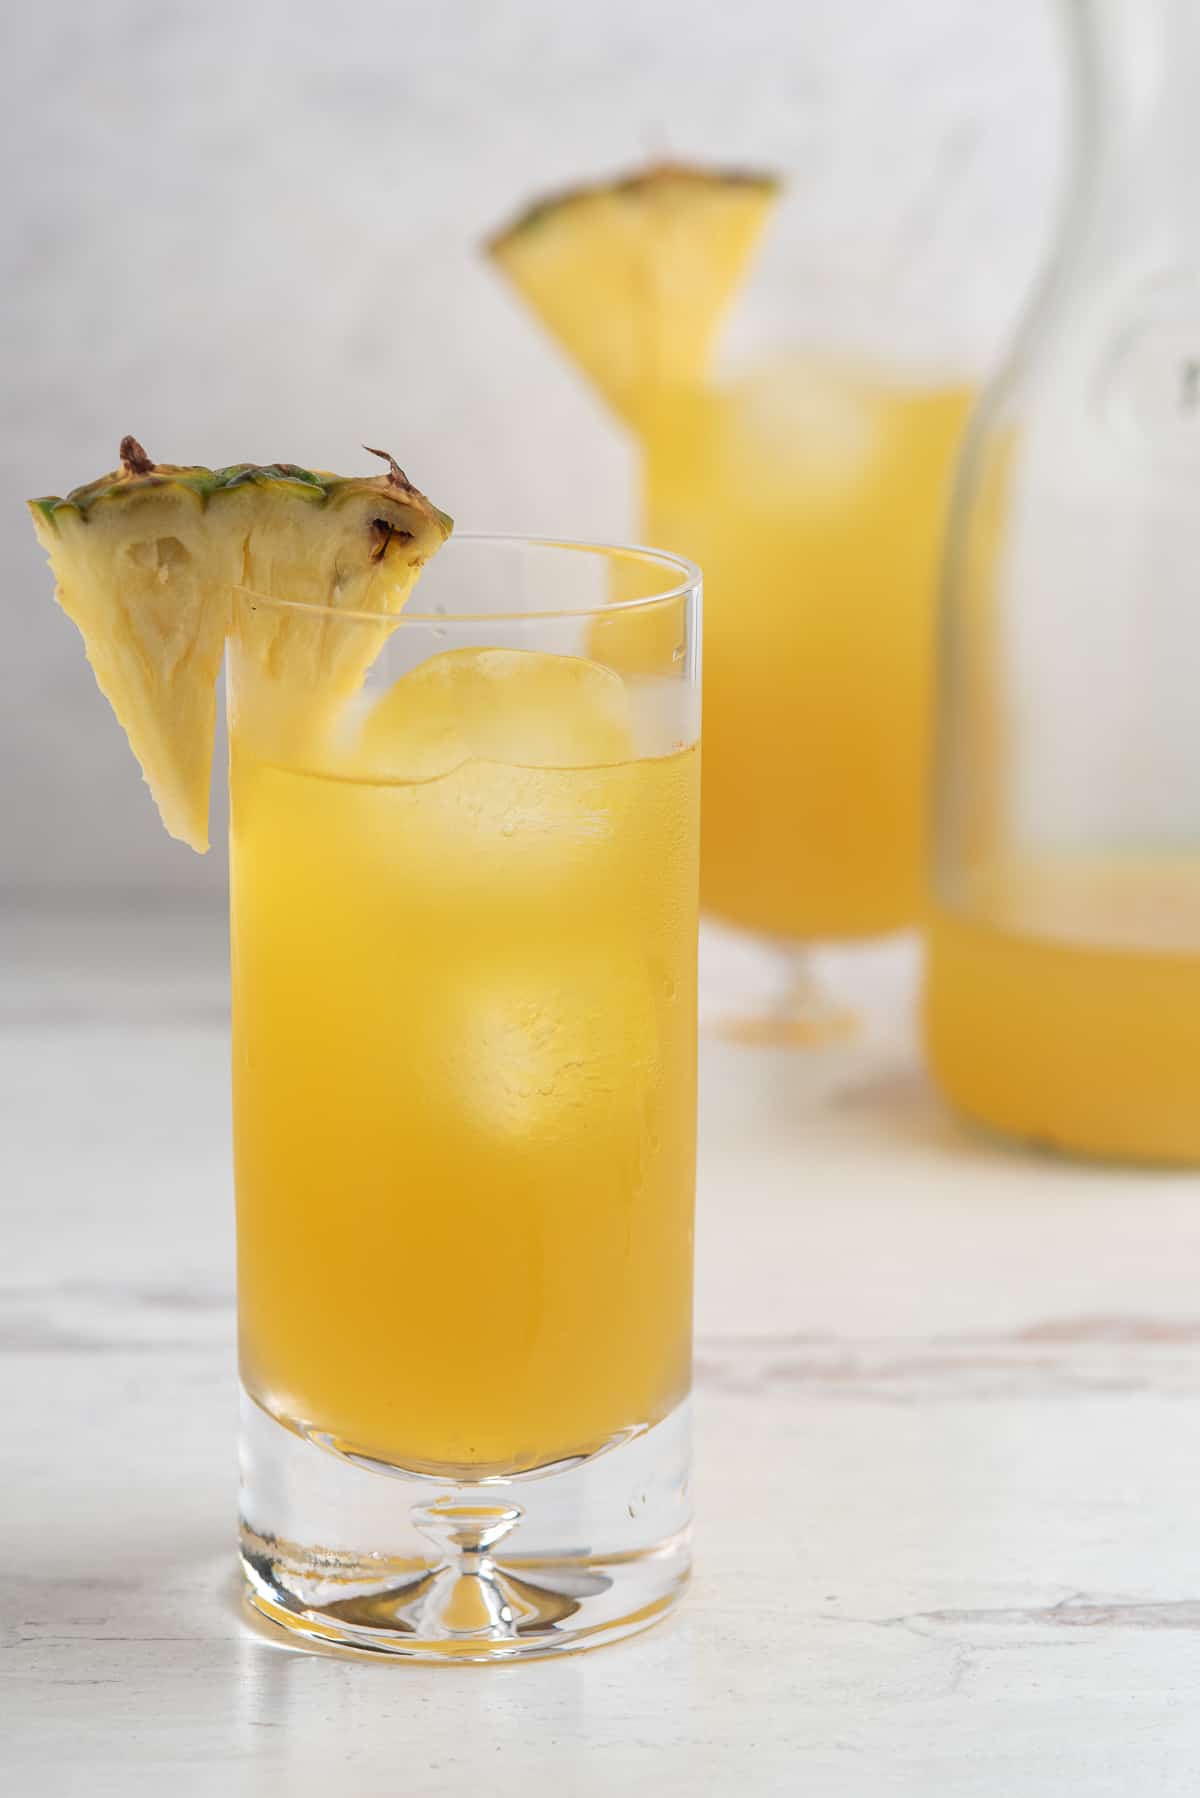 Tall, skinny glass of pineapple agua fresca with a fresh pineapple garnish on a white background